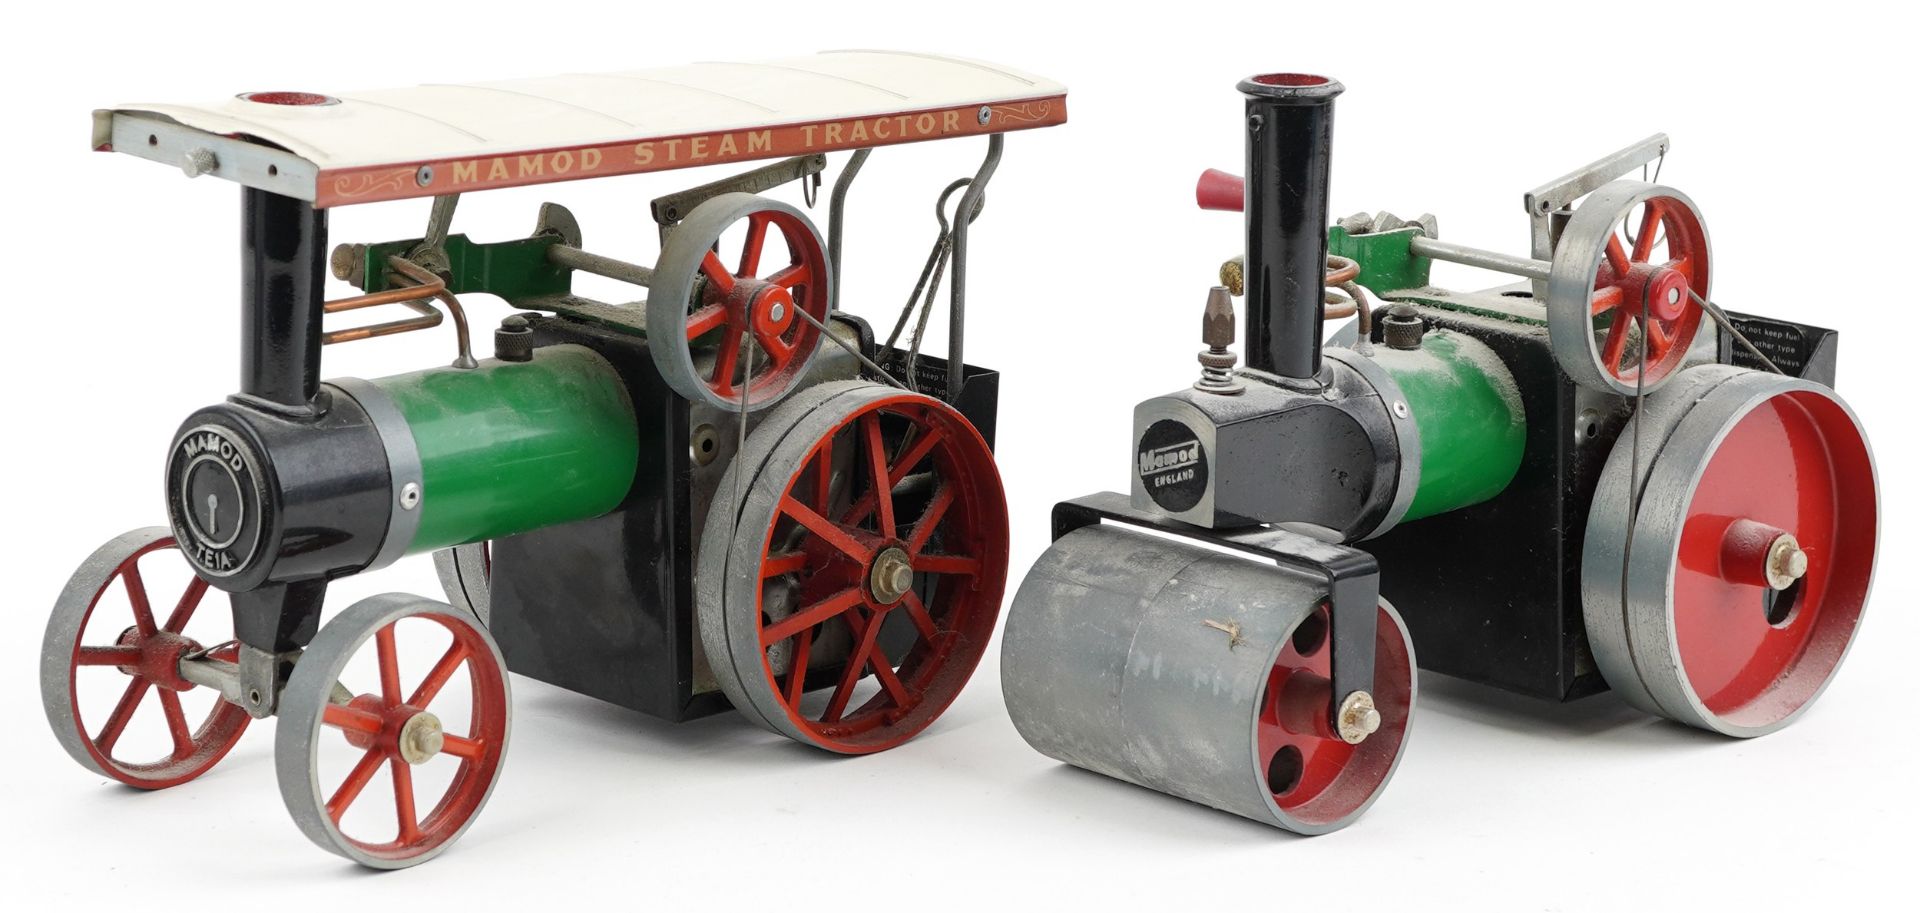 Two vintage Mamod steam tractor